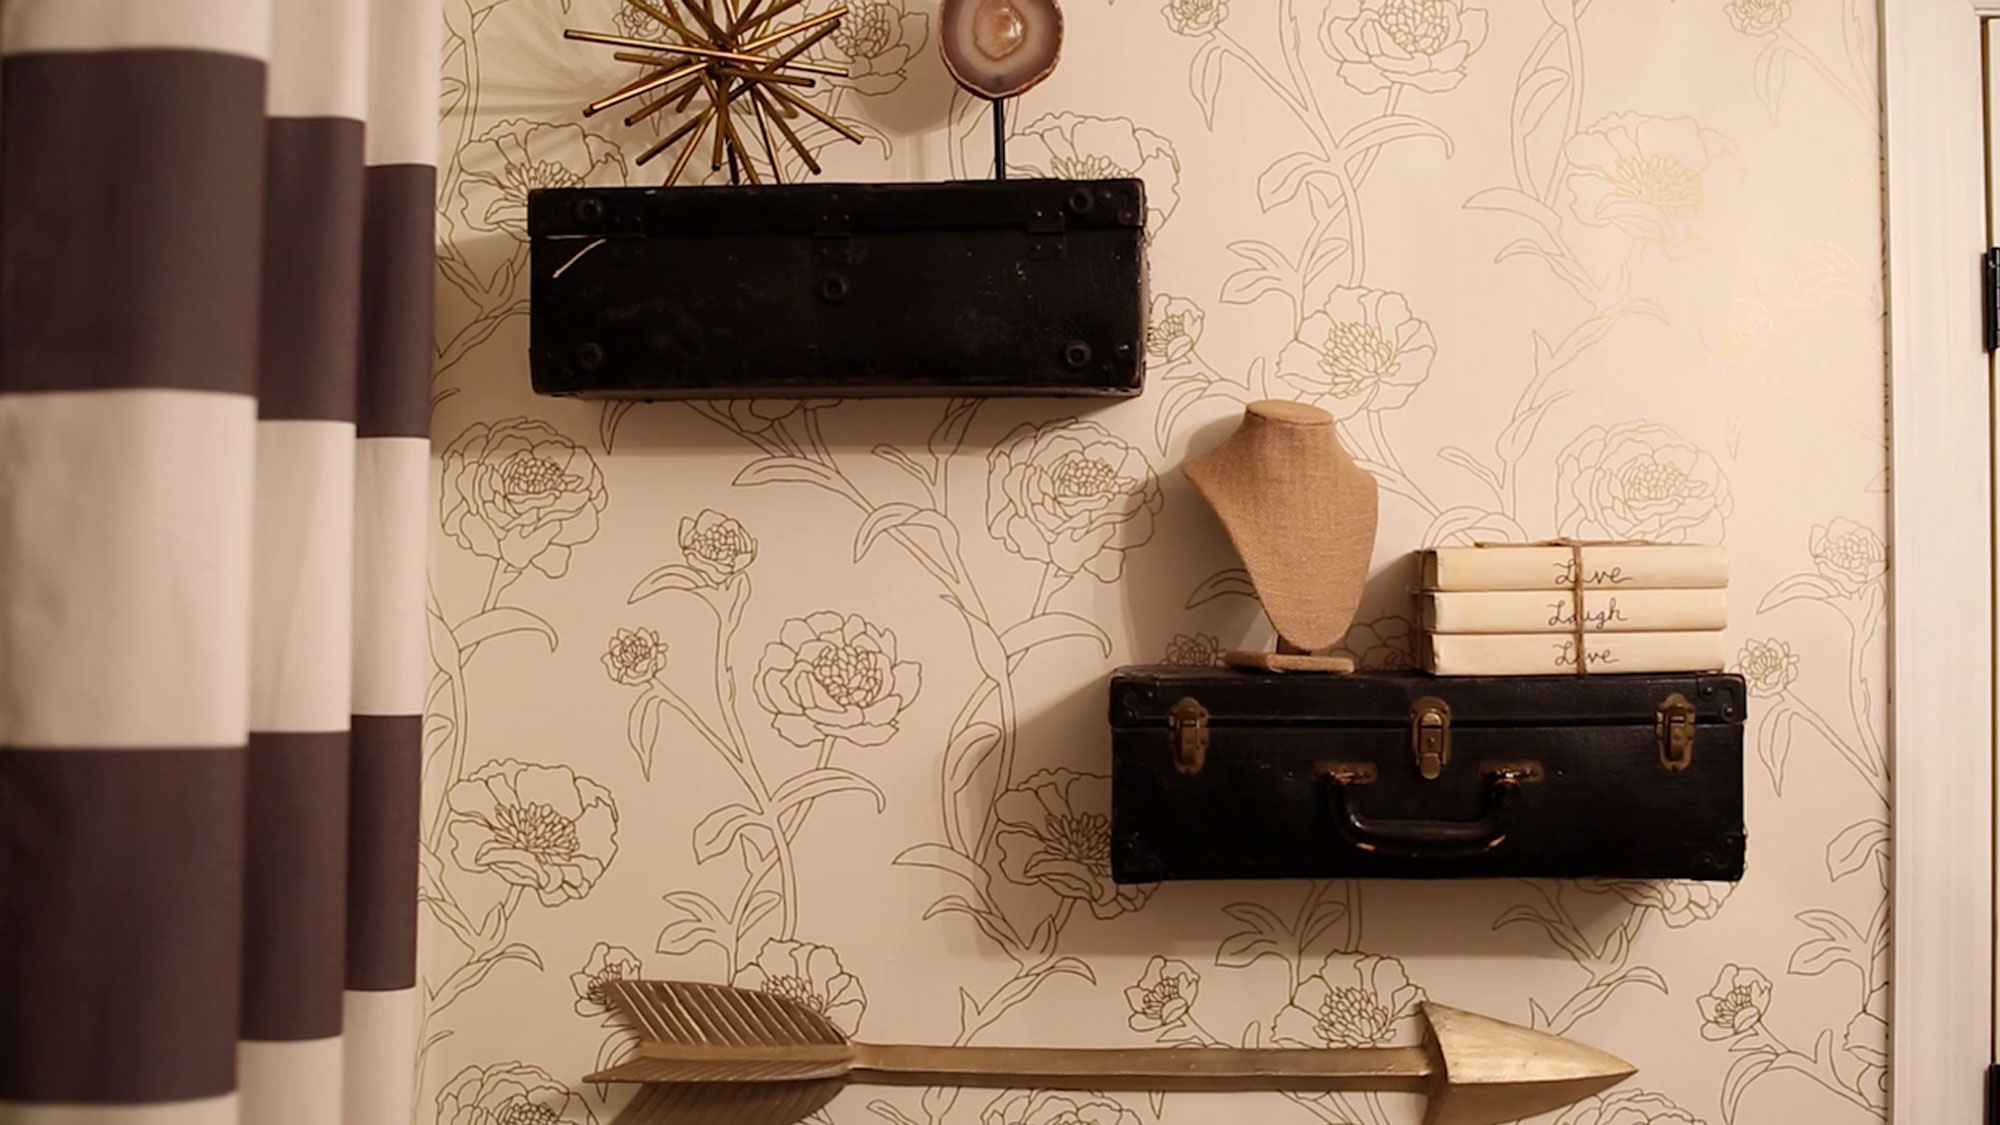 Nicole and Jionni's DIY Hack of the Week: Vintage Suitcase Shelves